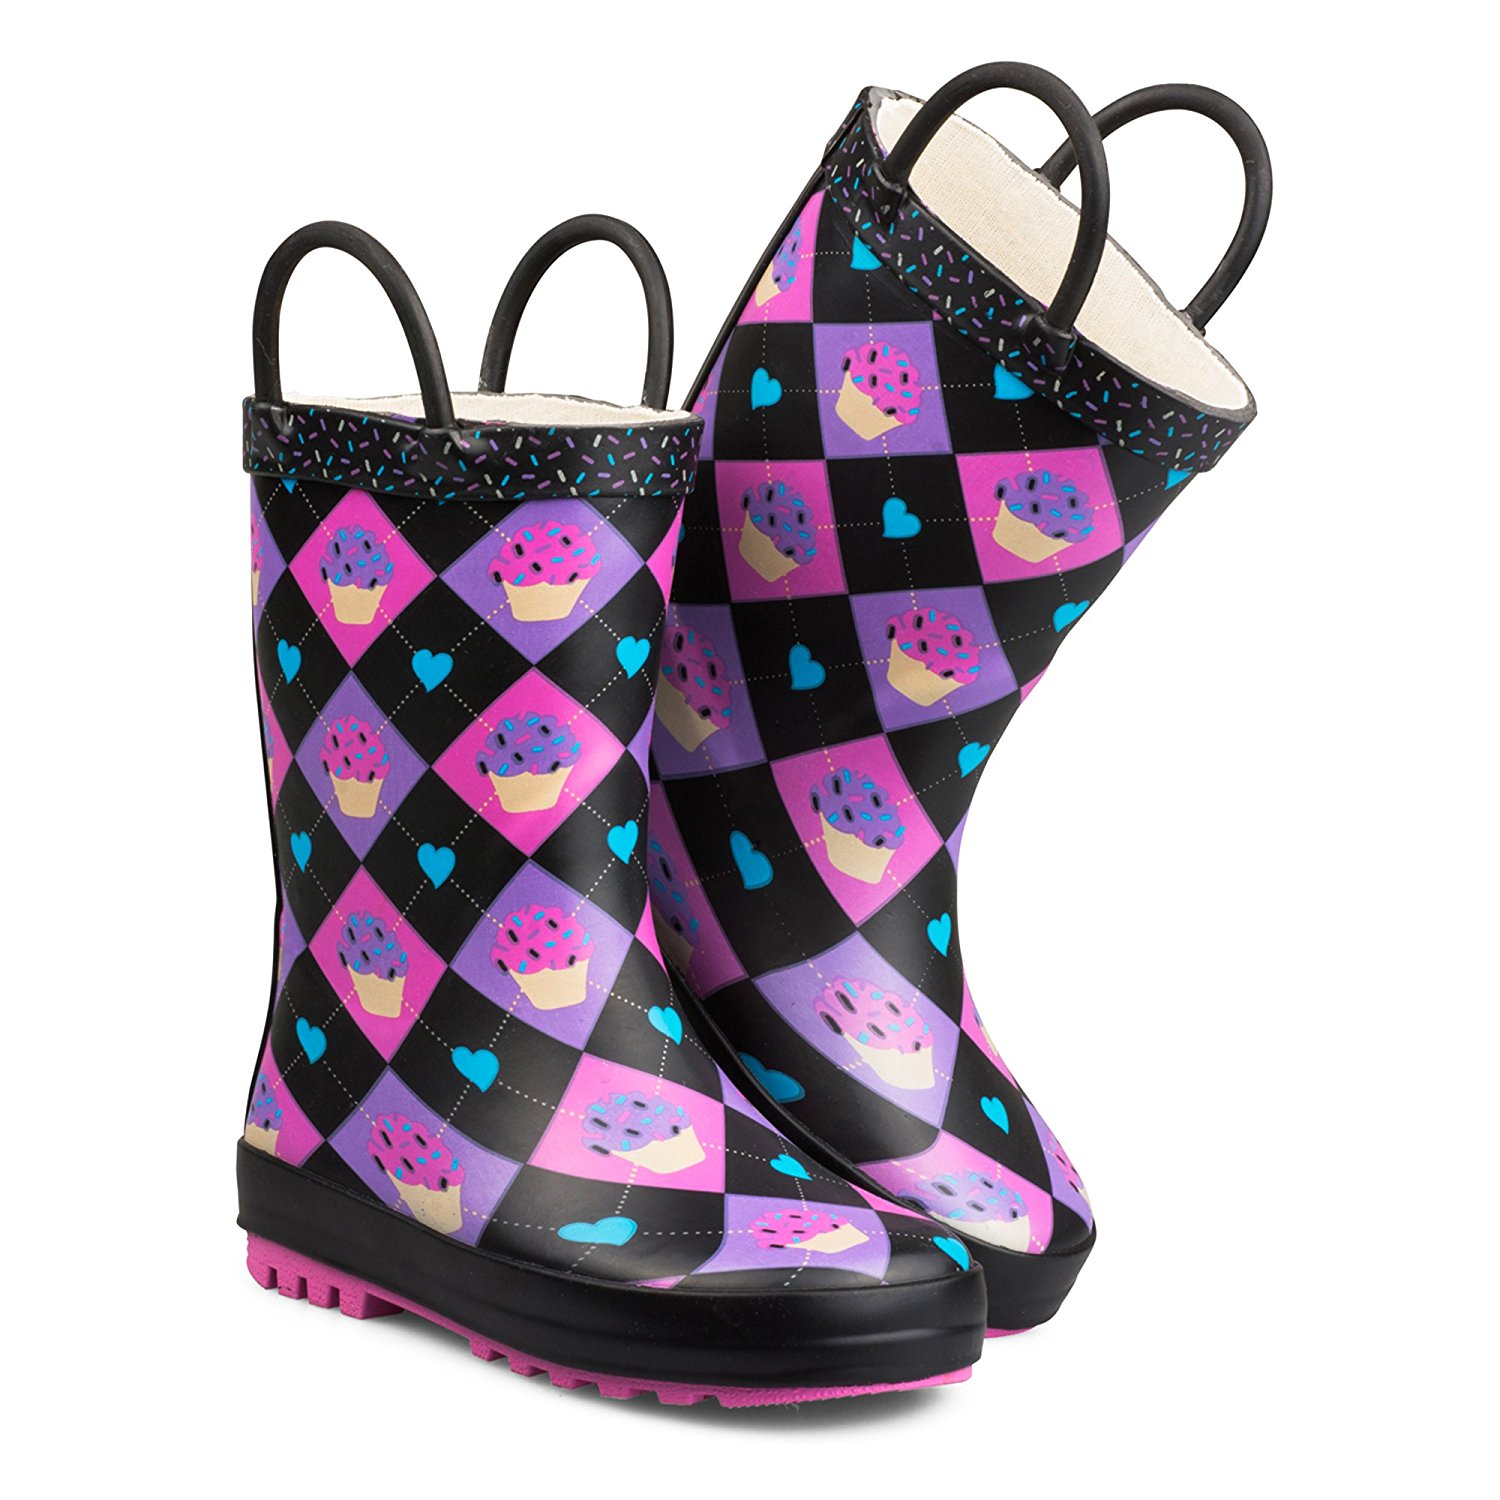 Chilipop cupcake rain boots for toddlers and kids